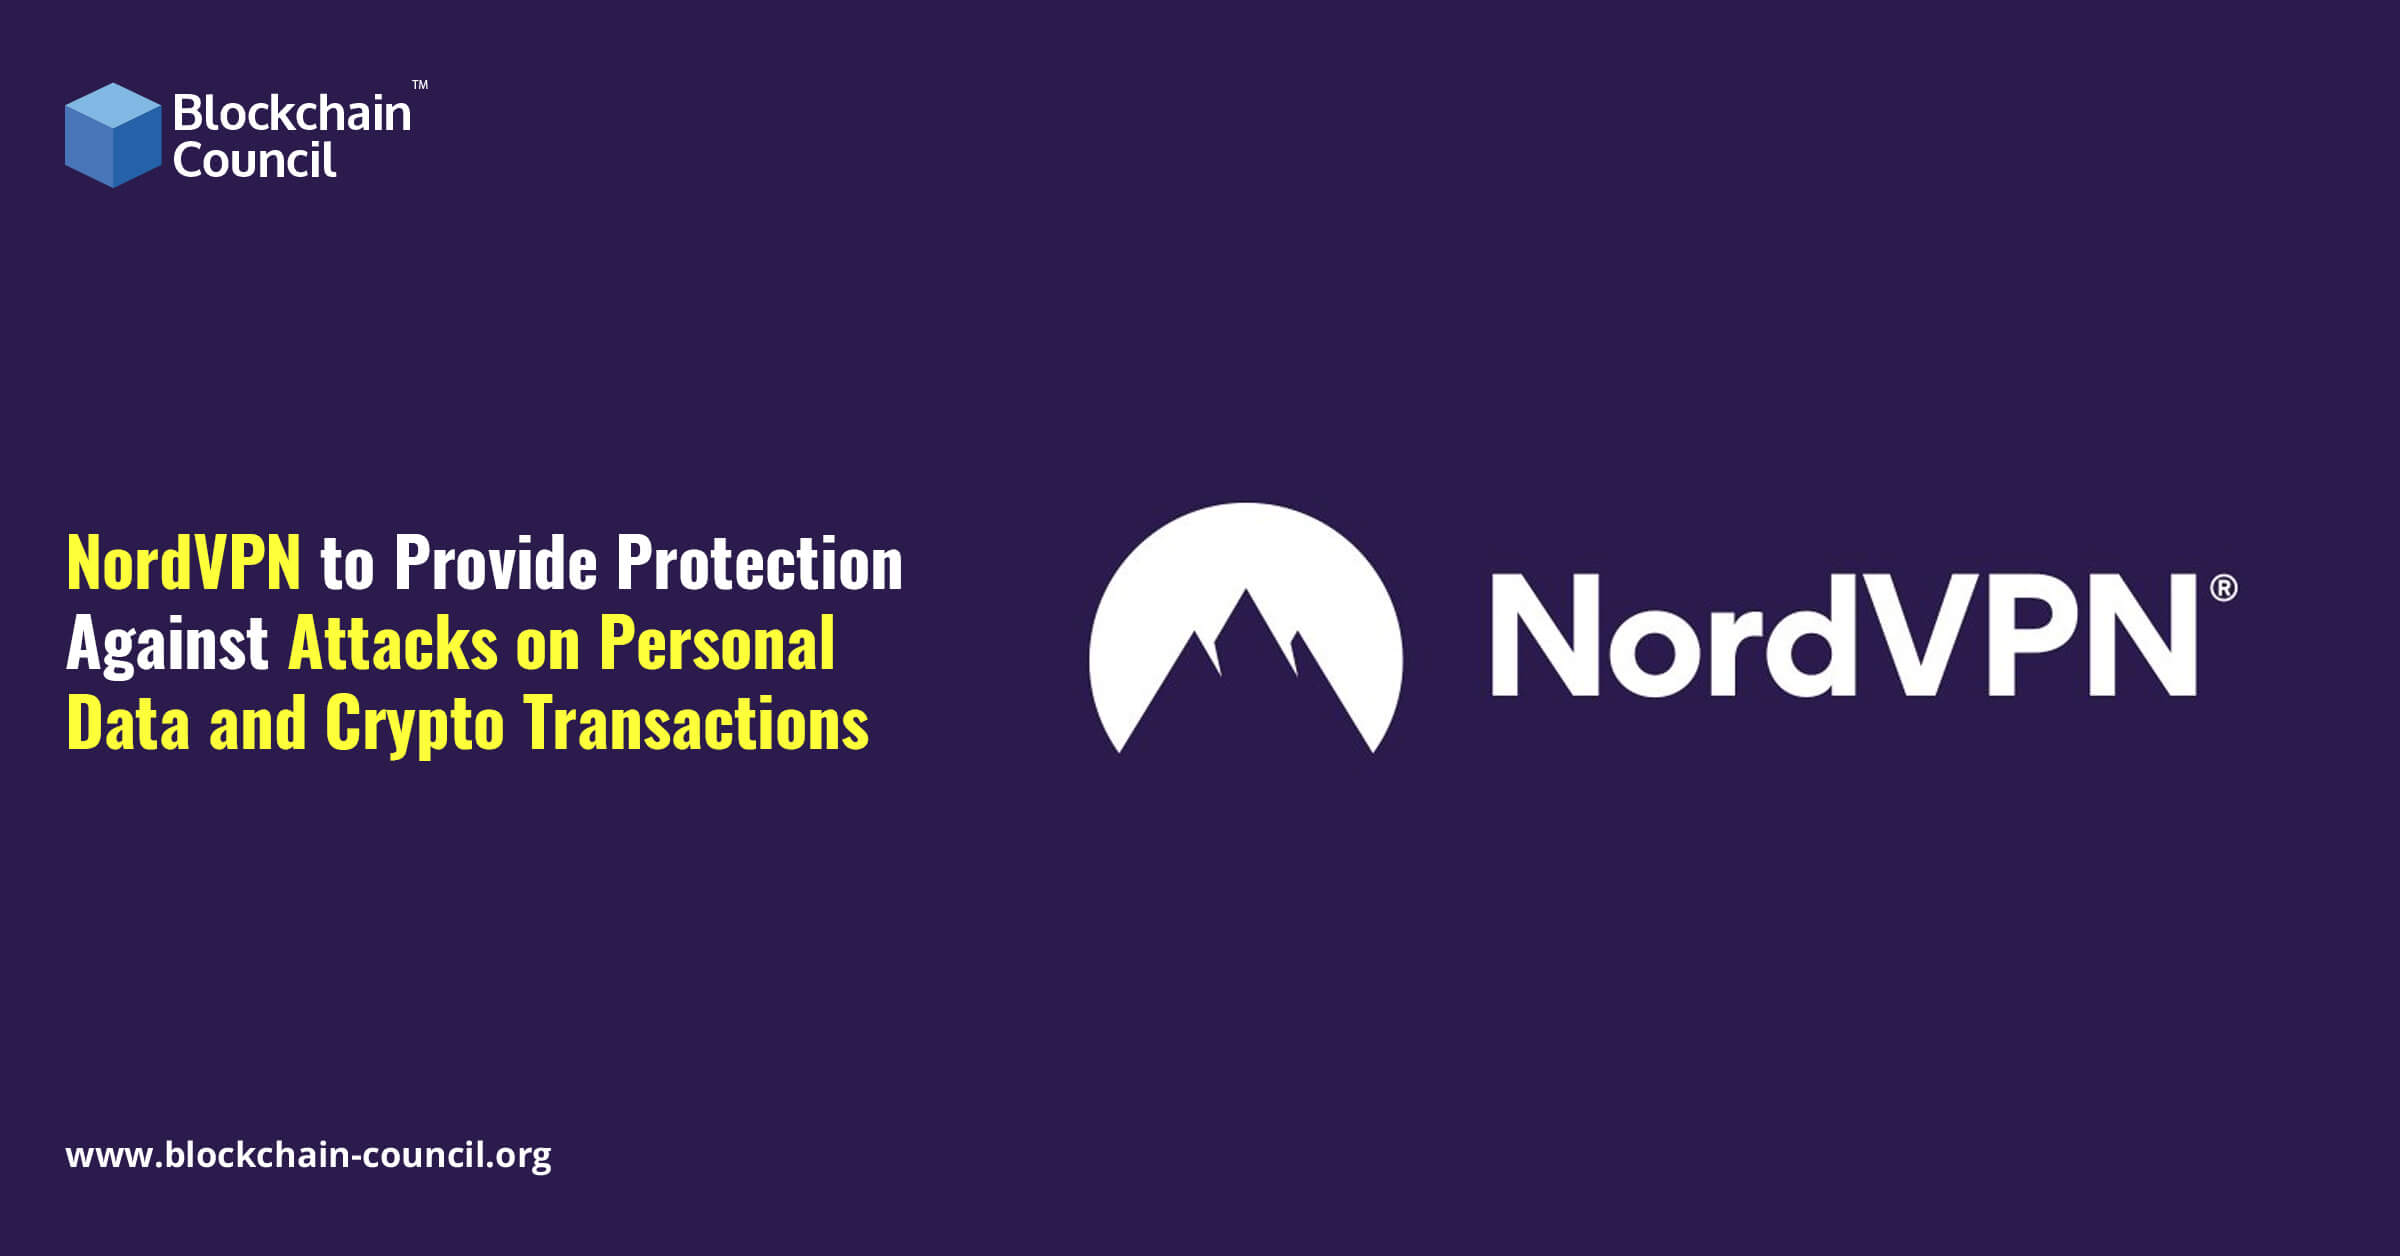 NordVPN to Provide Protection Against Attacks on Crypto Transactions